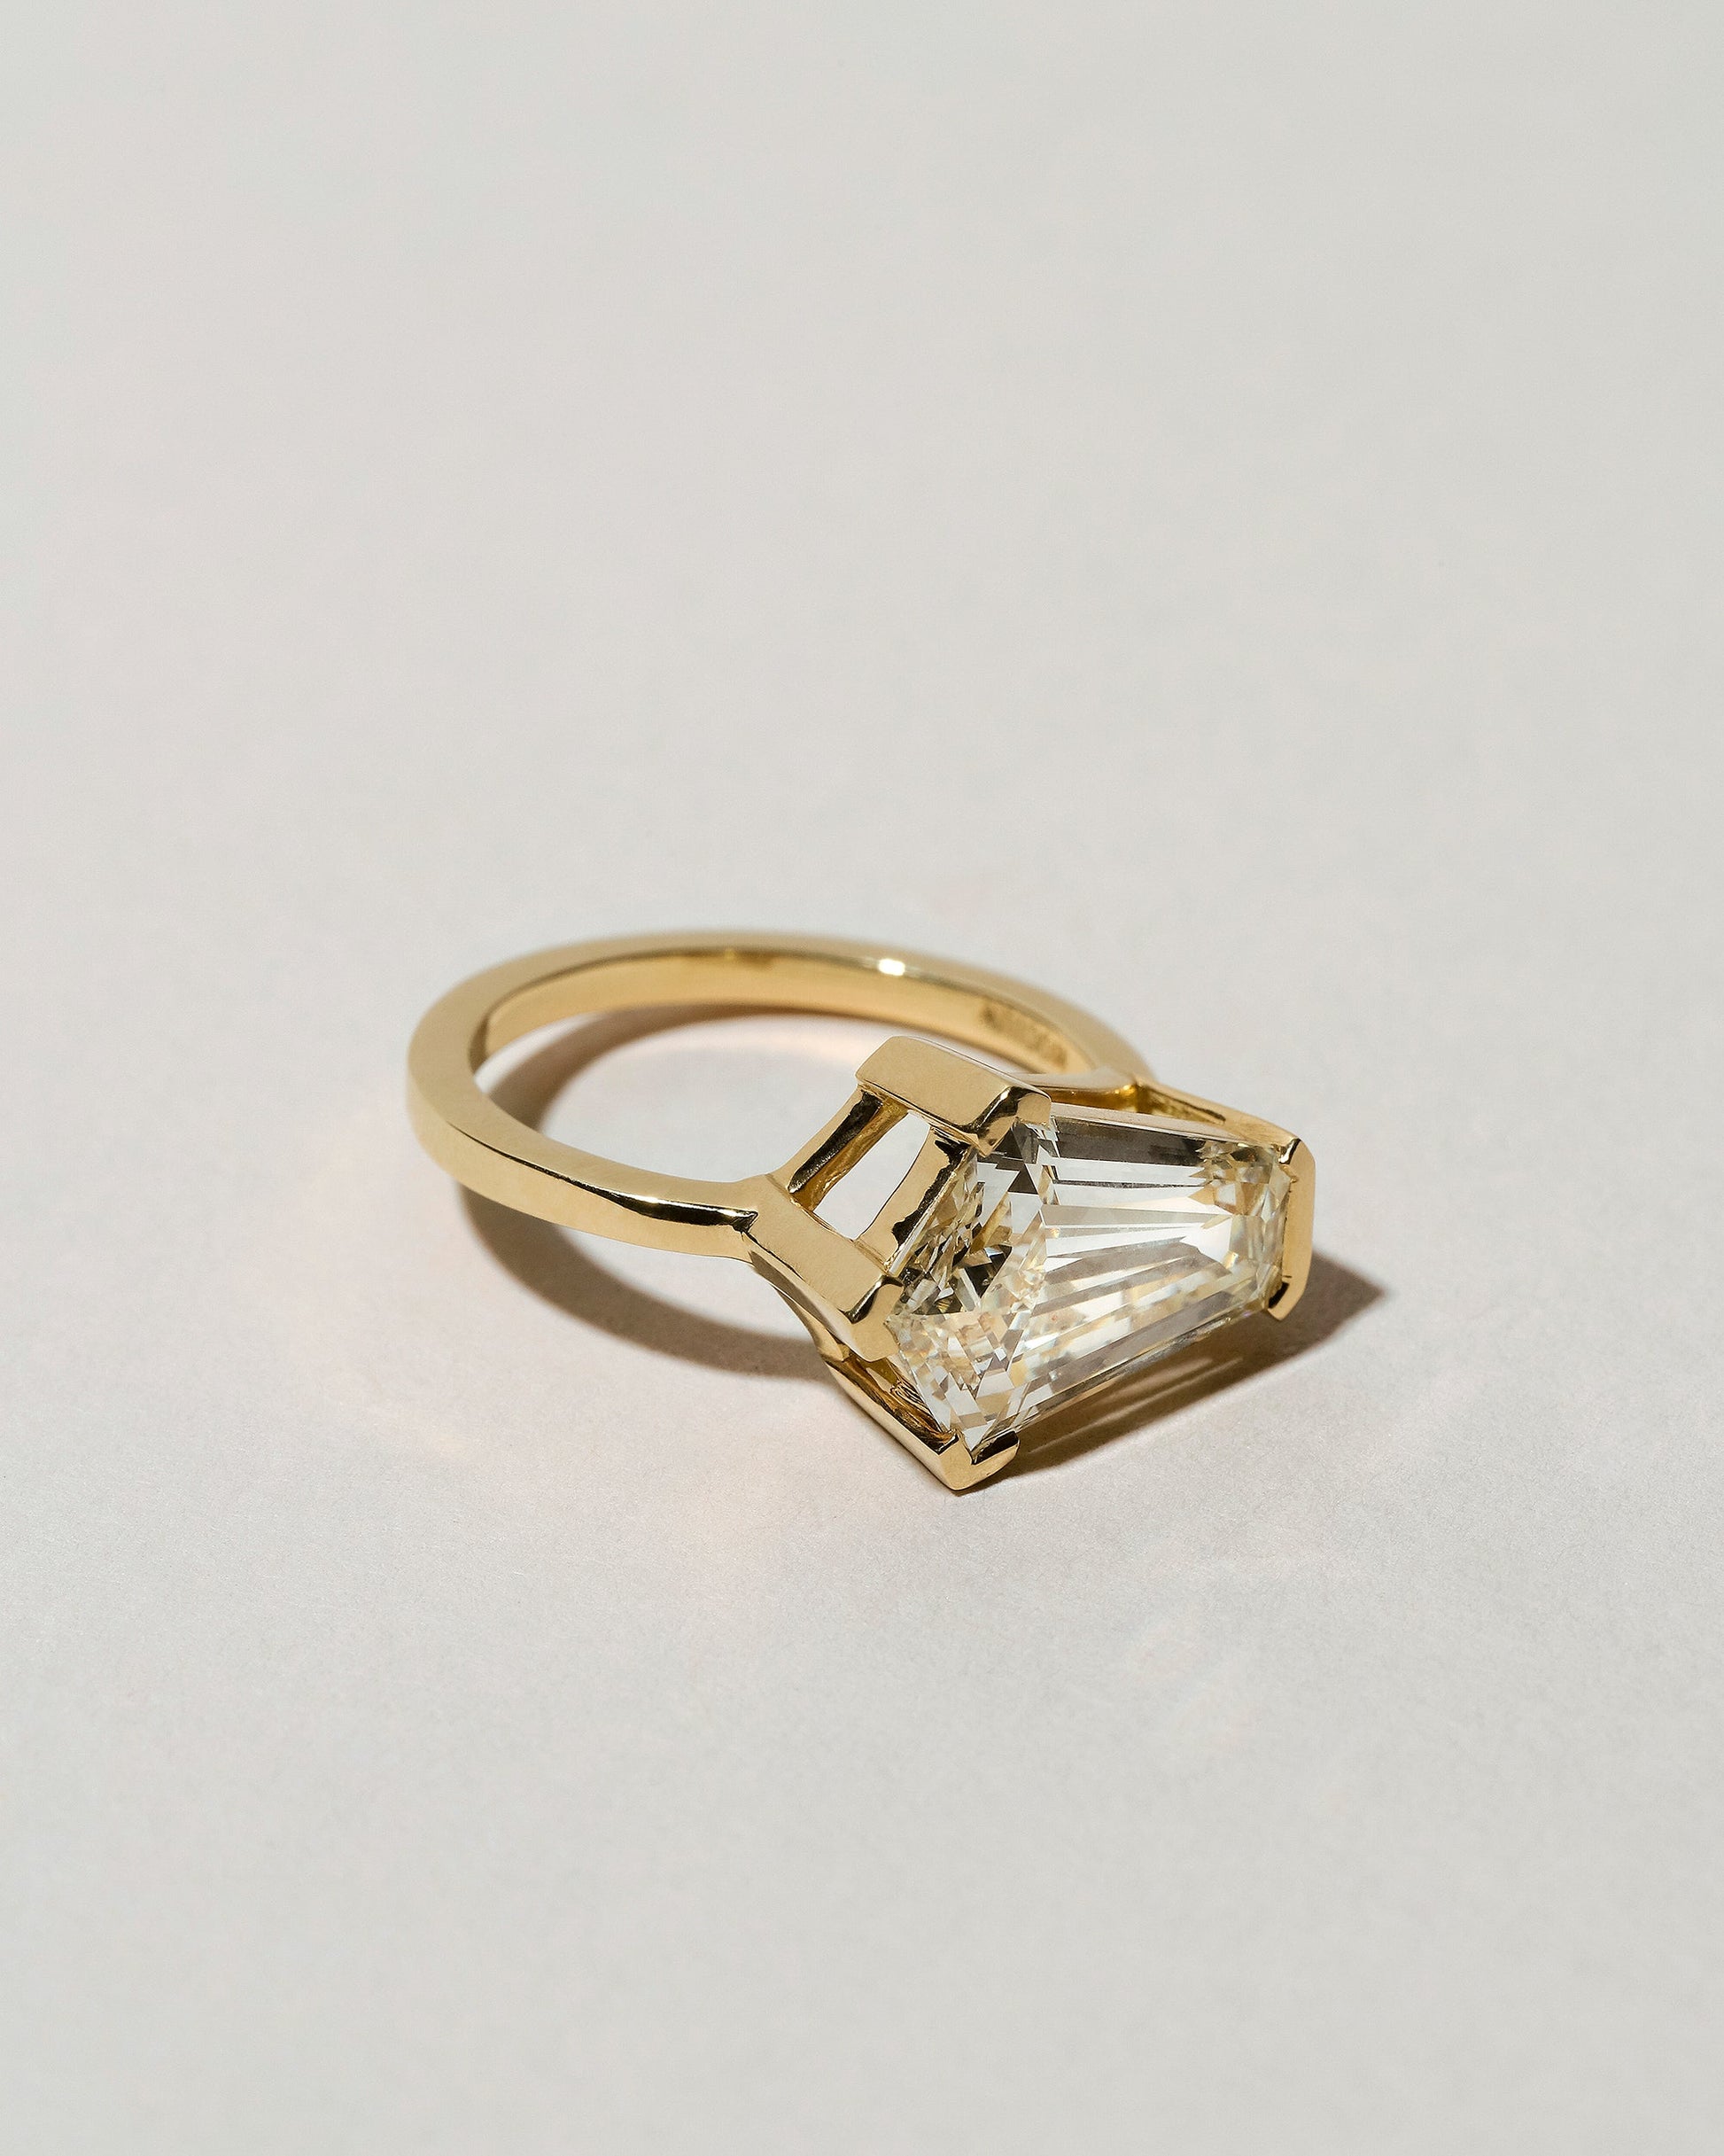  Modified Step Cut Diamond Ring on light color background.